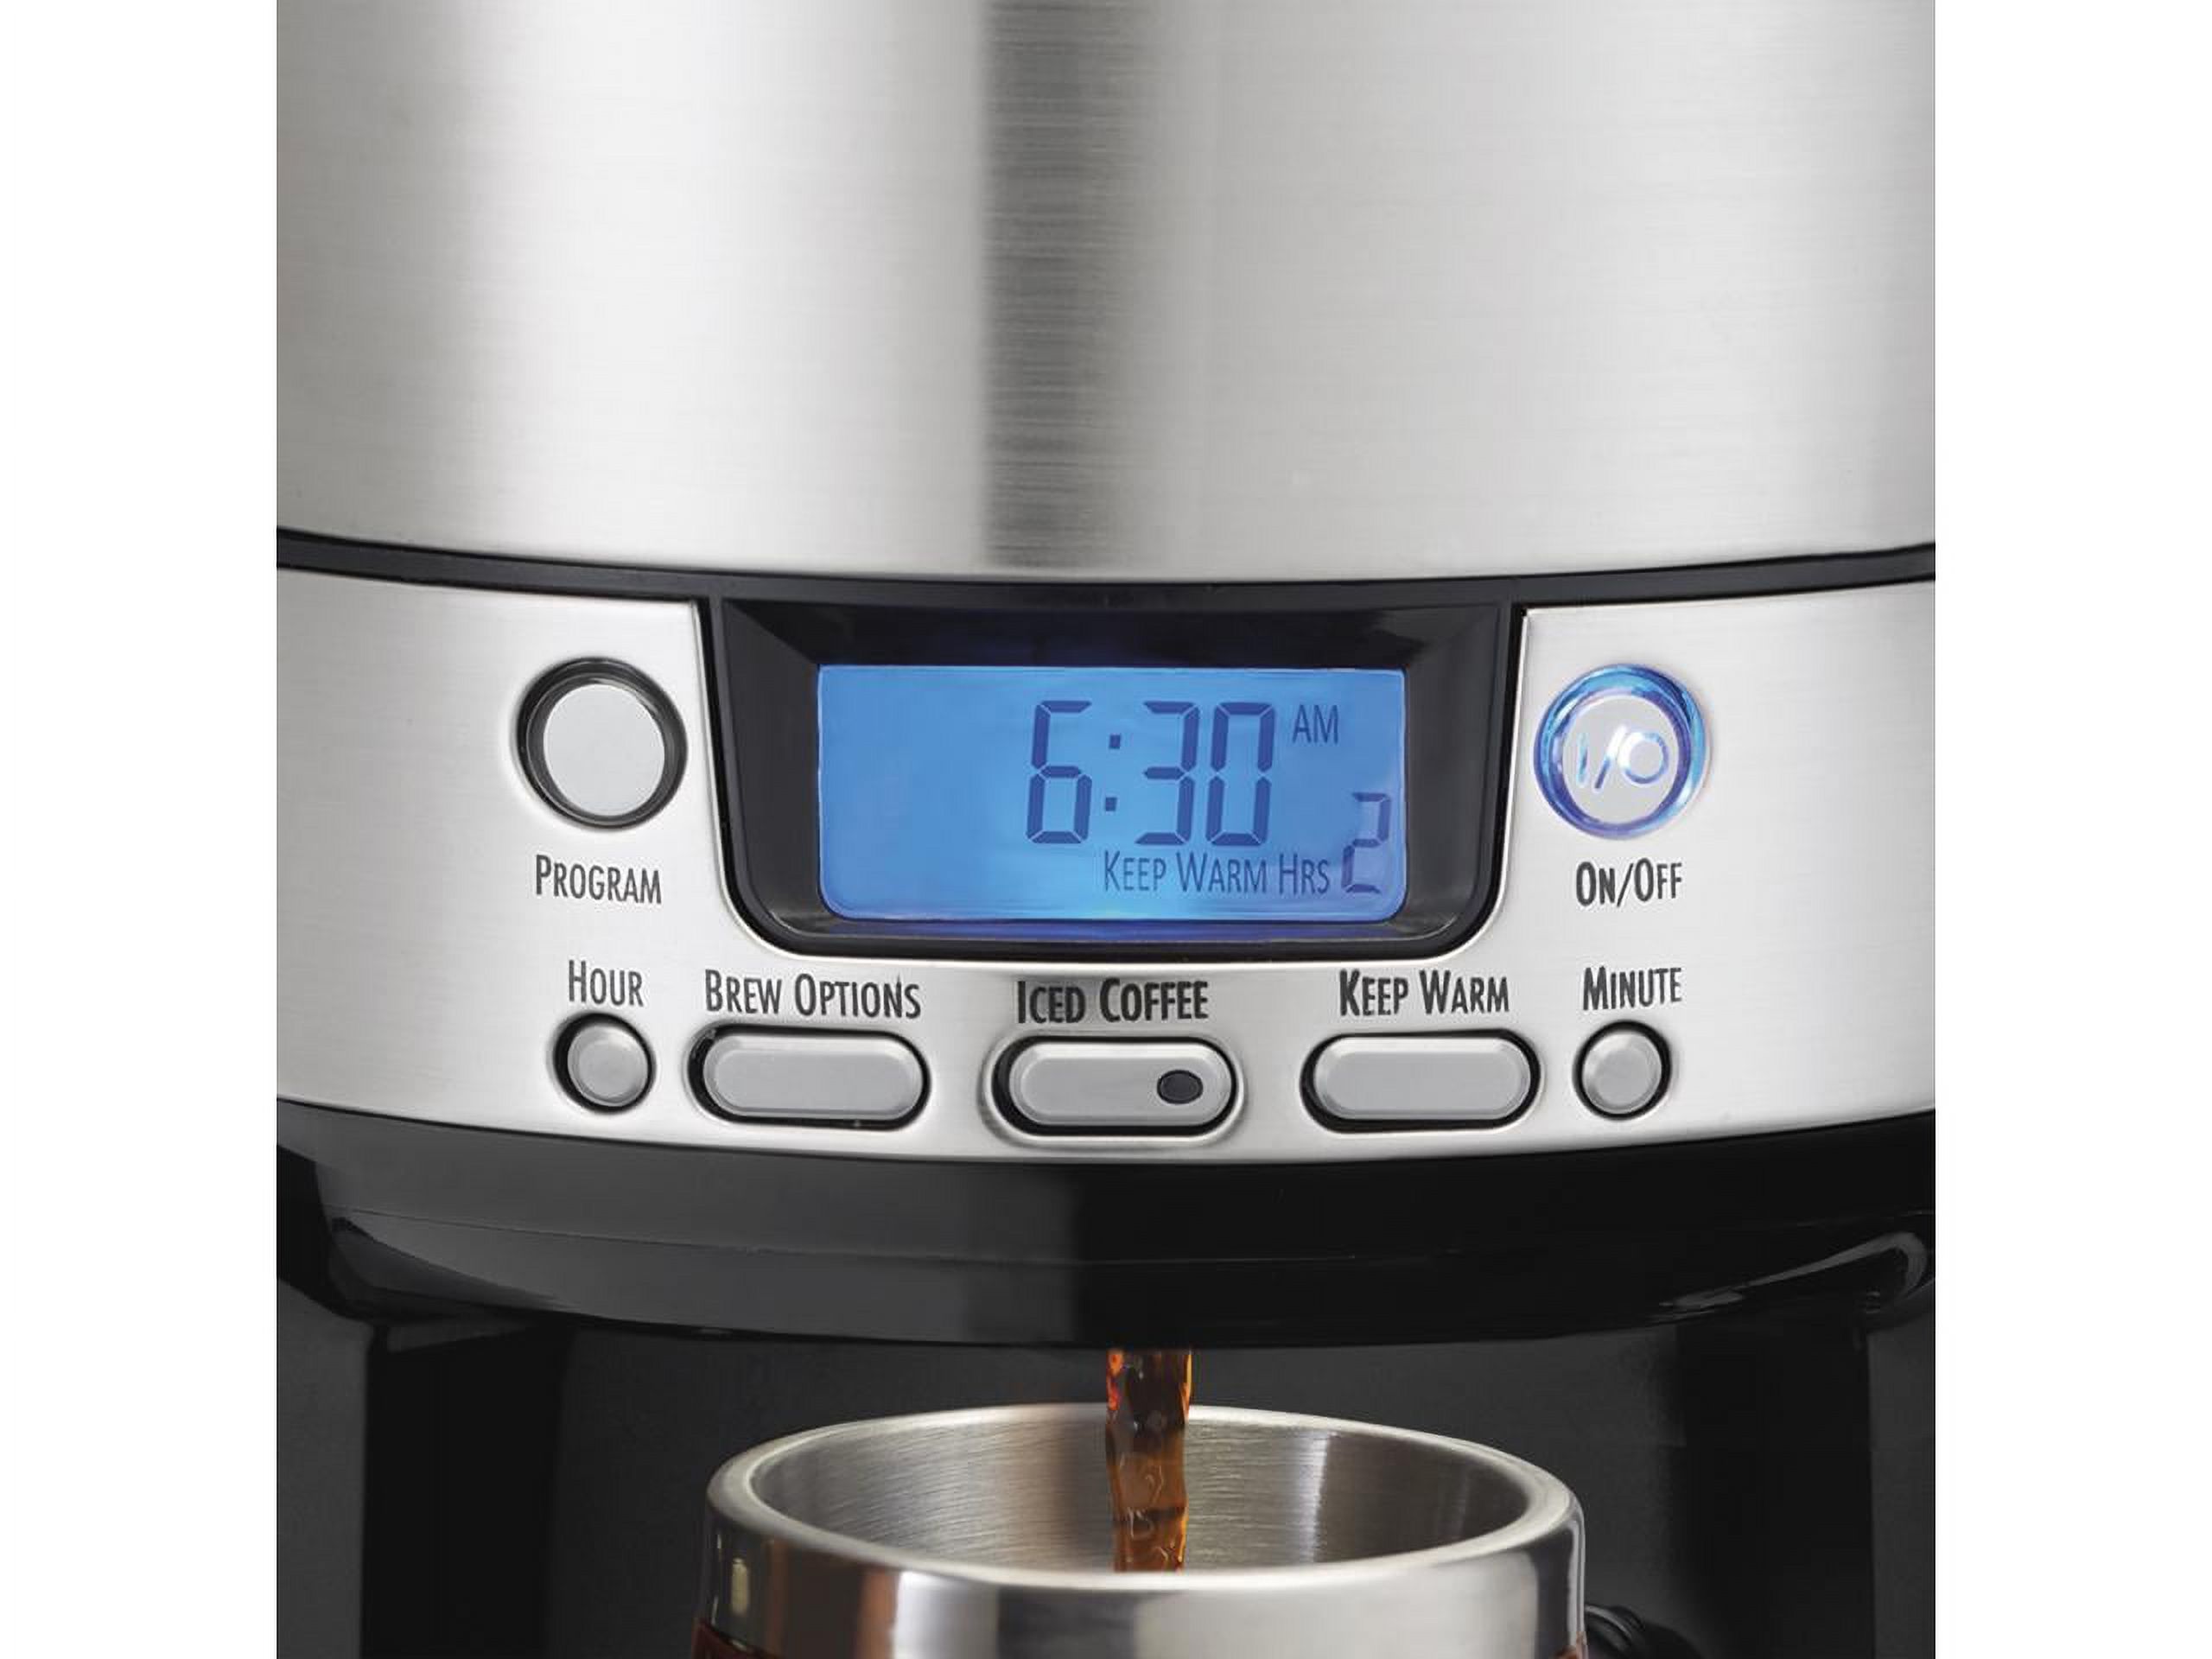 Hamilton Beach BrewStation 12 Cup Coffee Maker with Internal Heating, Black - image 5 of 6